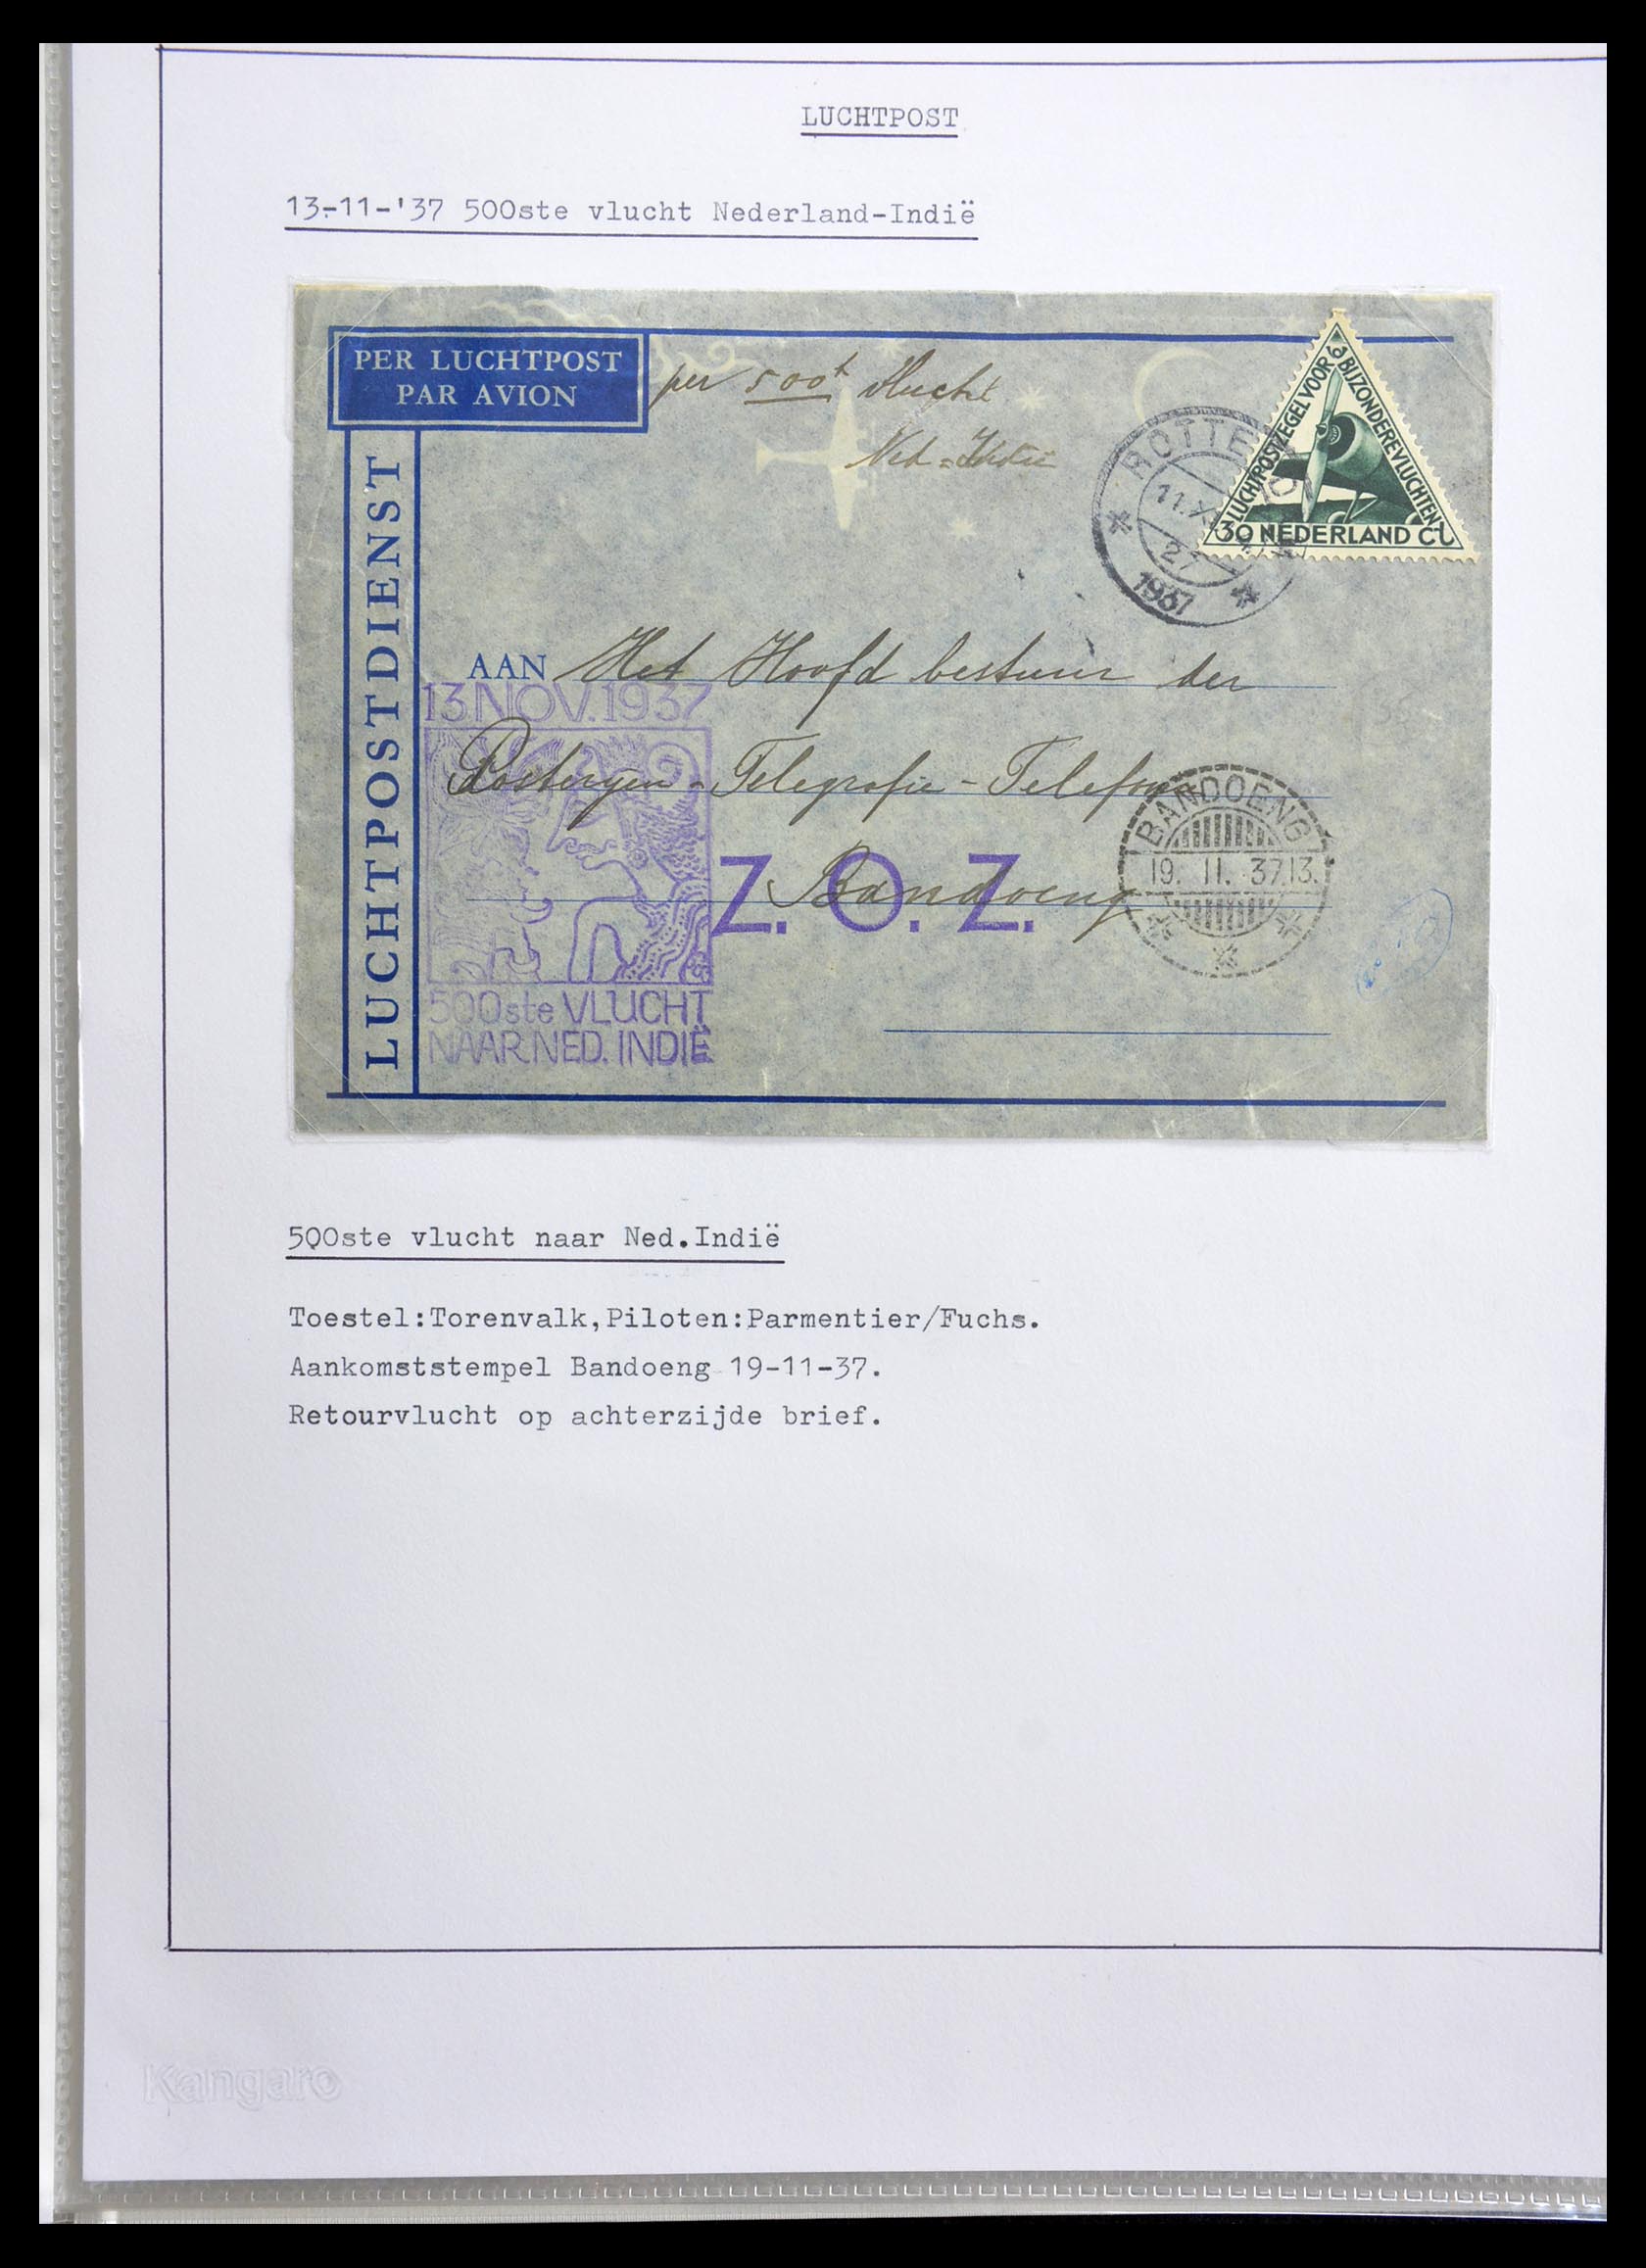 29087 013 - 29087 Netherlands airmail covers 1933-1953.